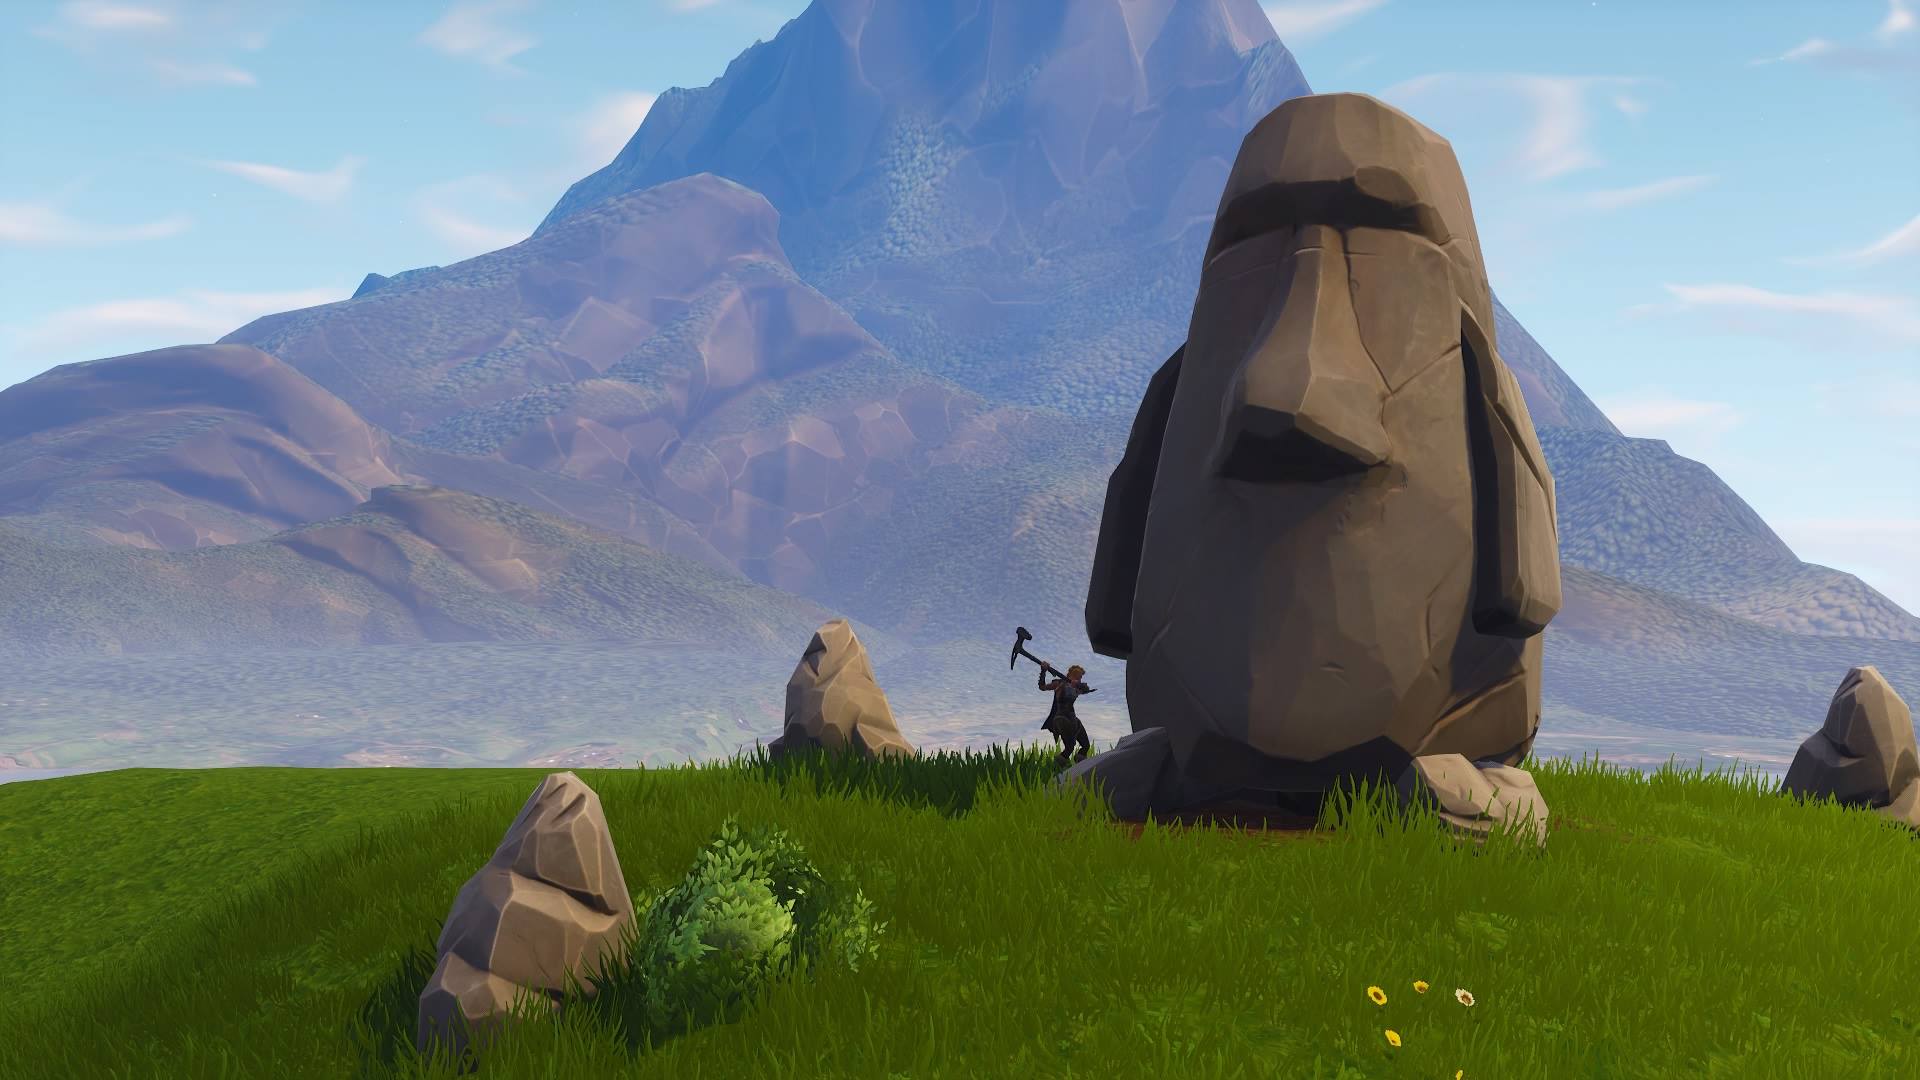 fortnite search stone heads location map and video for week 6 challenge inverse - fortnite challenge search where the stone heads are looking